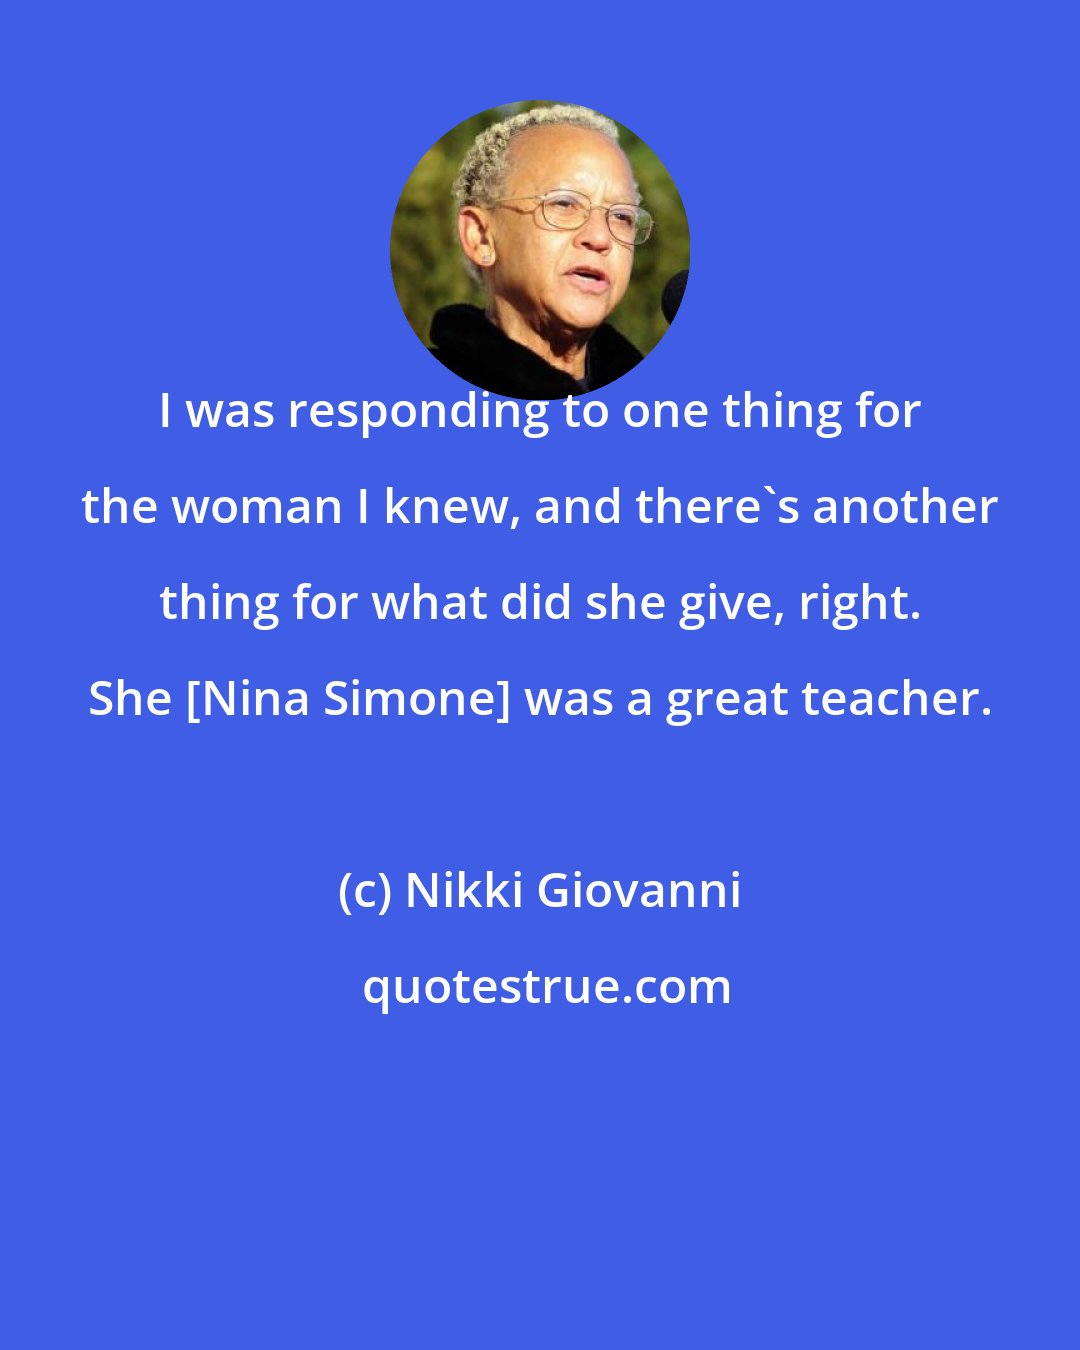 Nikki Giovanni: I was responding to one thing for the woman I knew, and there's another thing for what did she give, right. She [Nina Simone] was a great teacher.